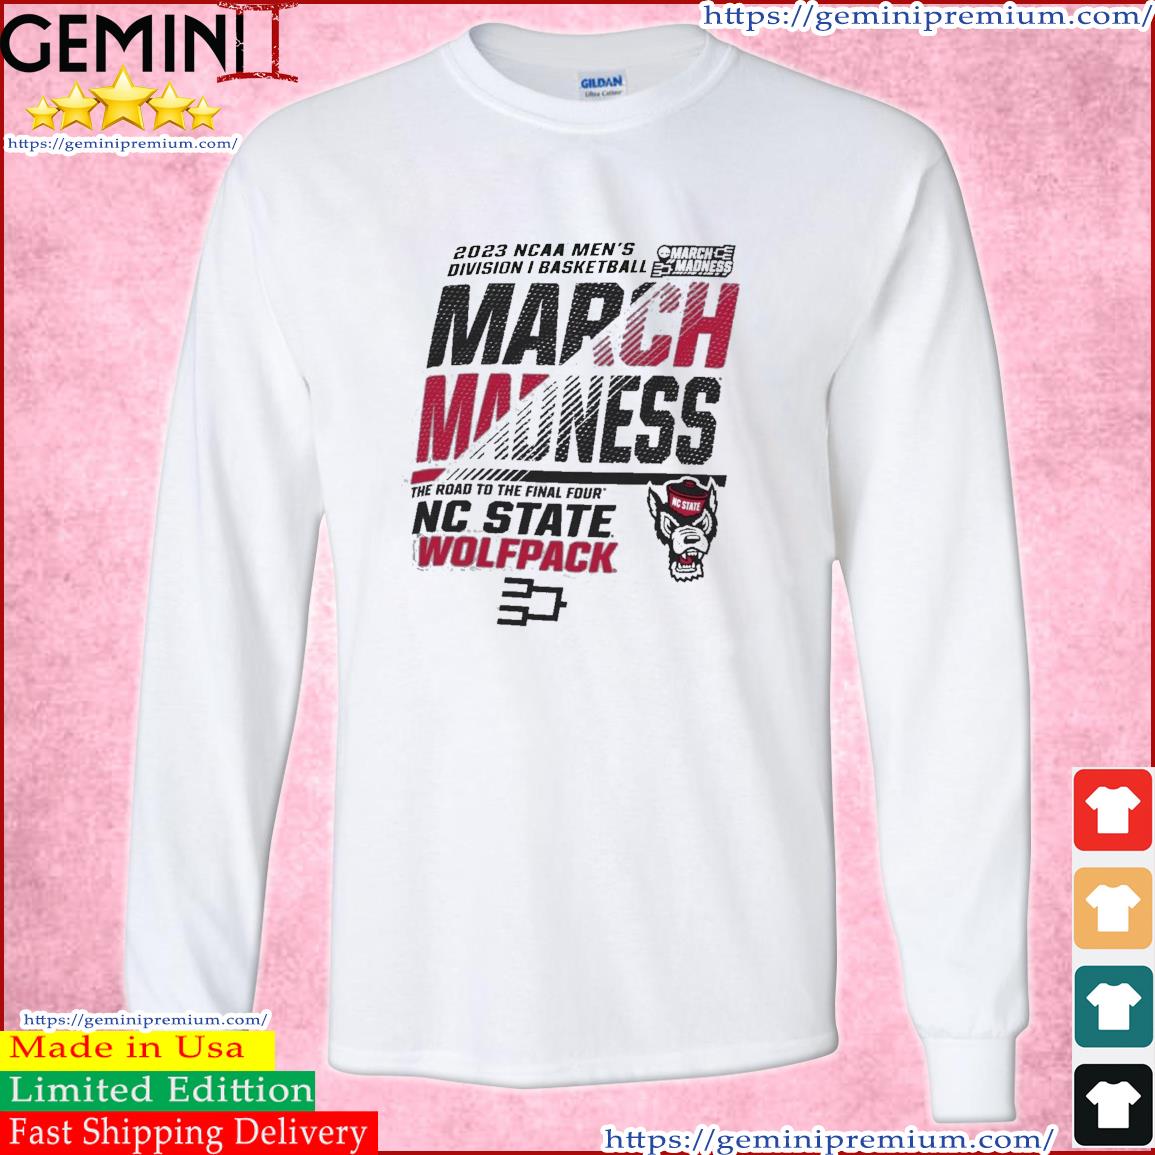 NC State Wolfpack 2023 NCAA Men's Basketball March Madness Shirt Long Sleeve Tee